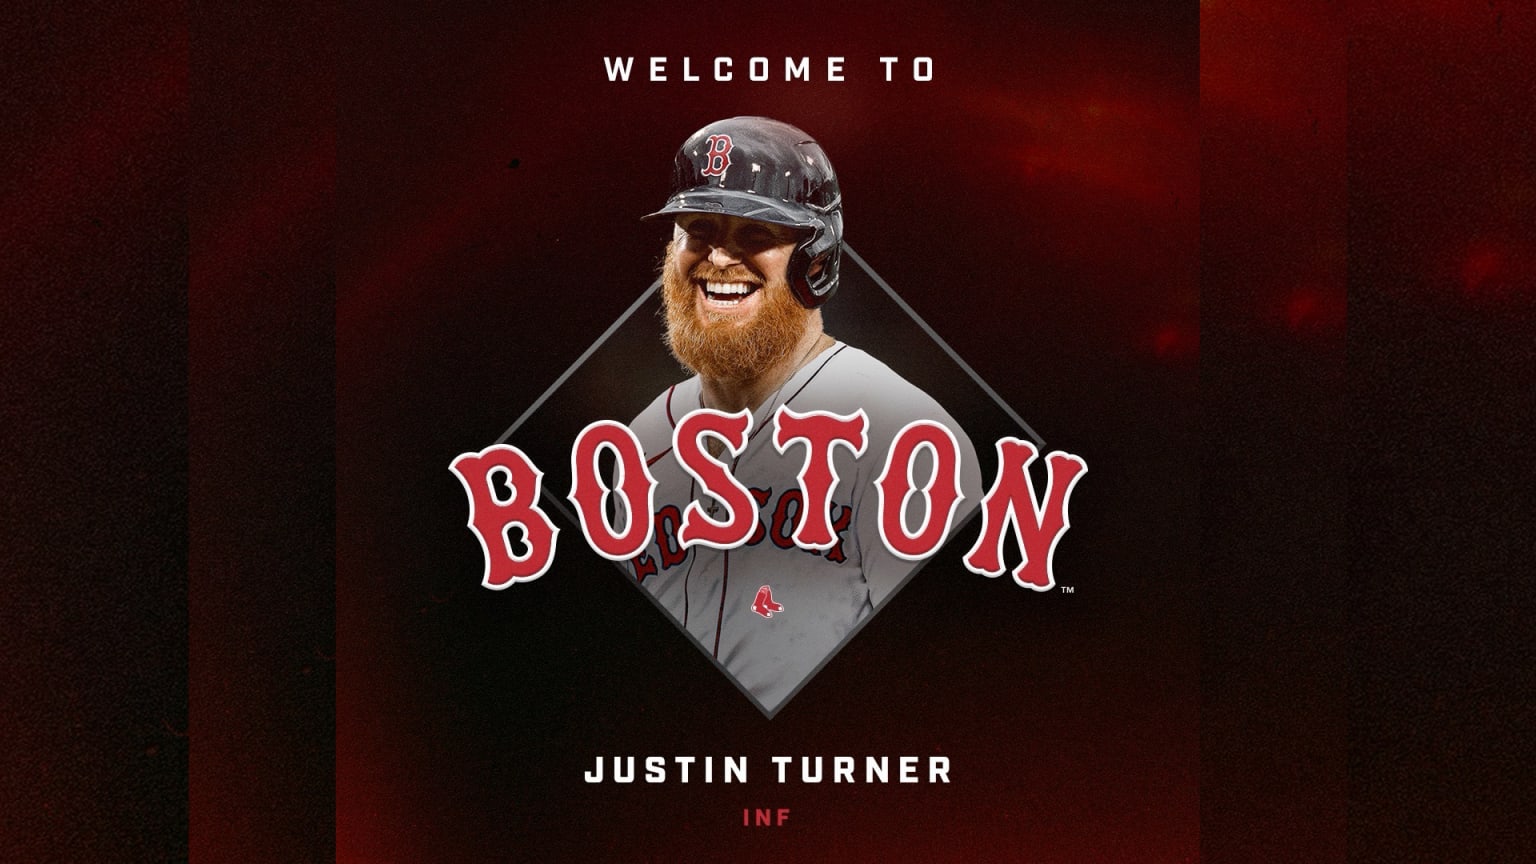 Buy JUSTIN TURNER RED SOX ON THE MOVE SHIRT For Free Shipping CUSTOM XMAS  PRODUCT COMPANY